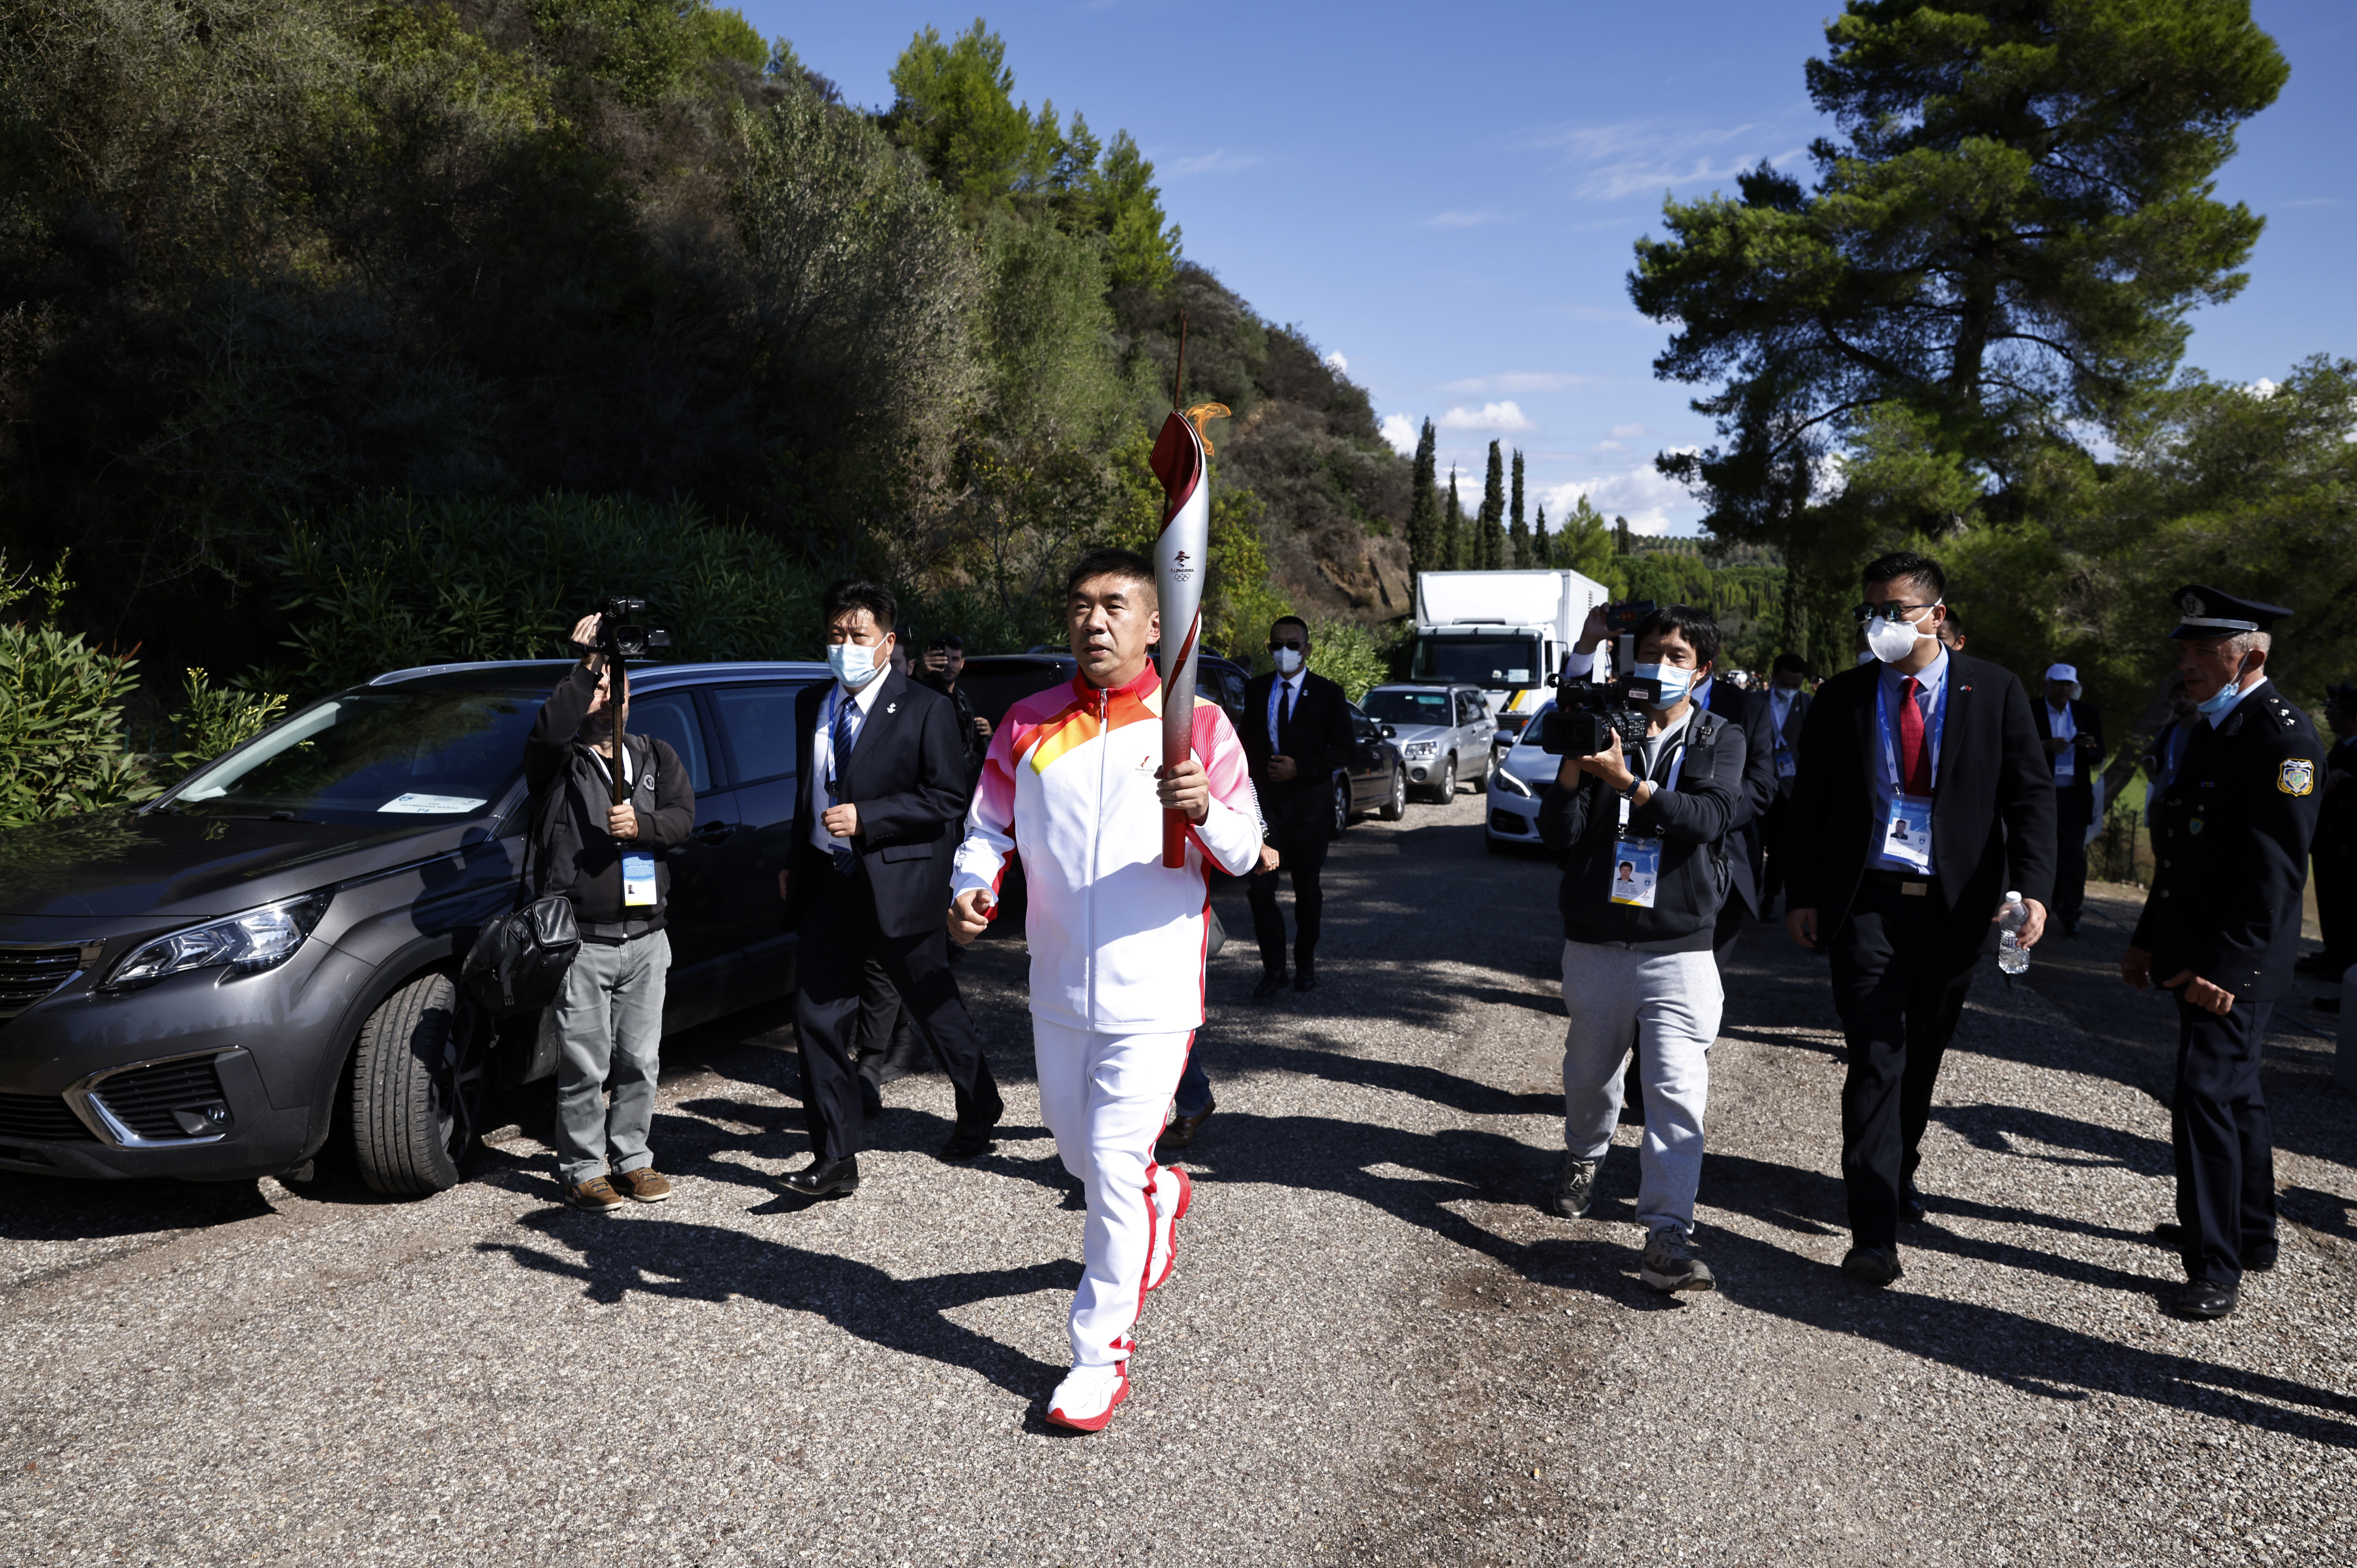 Winter Olympics - Lighting ceremony of the Olympic flame for the Beijing 2022 Winter Olympics - Ancient Olympia, Olympia, Greece - October 18, 2021 Second torchbearer, former Chinese track speed skater Li Jiajun runs with the Olympic flame during the Olympic flame lighting ceremony for the Beijing 2022 Winter Olympics REUTERS/Alkis Konstantinidis